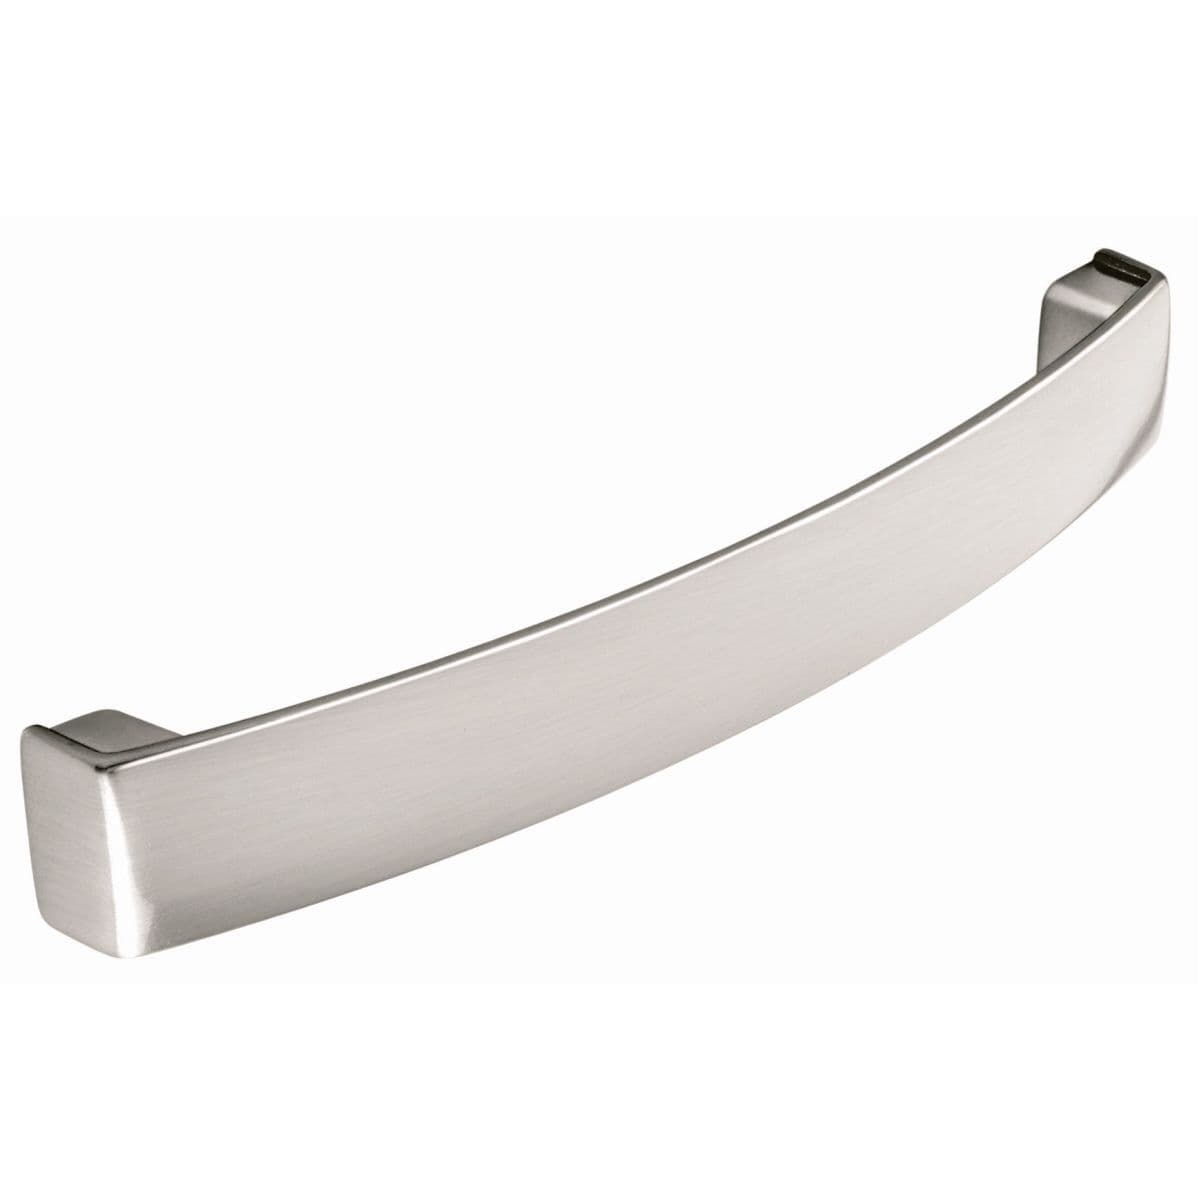 SEAHAM BOW Cupboard Handle - 2 sizes - 2 finishes (PWS 8/1027.SS / H1081.160.BC)